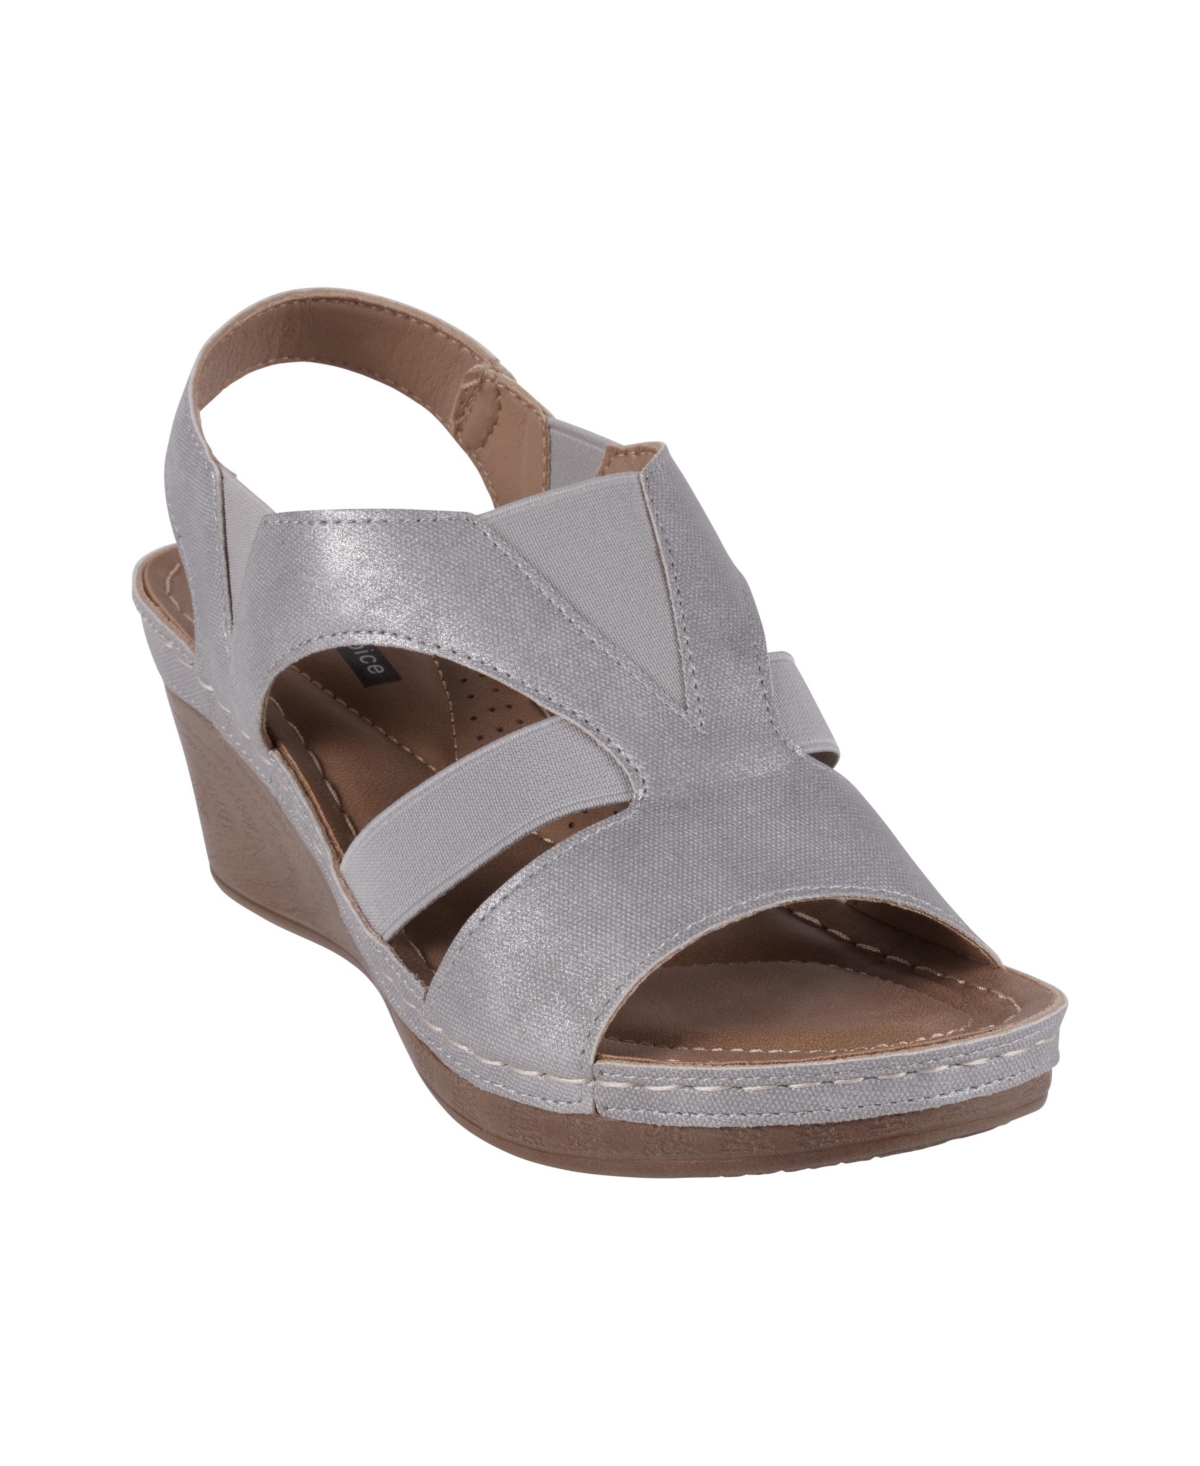 Women's Banks Cut Out Elastic Slingback Wedge Sandals - Silver